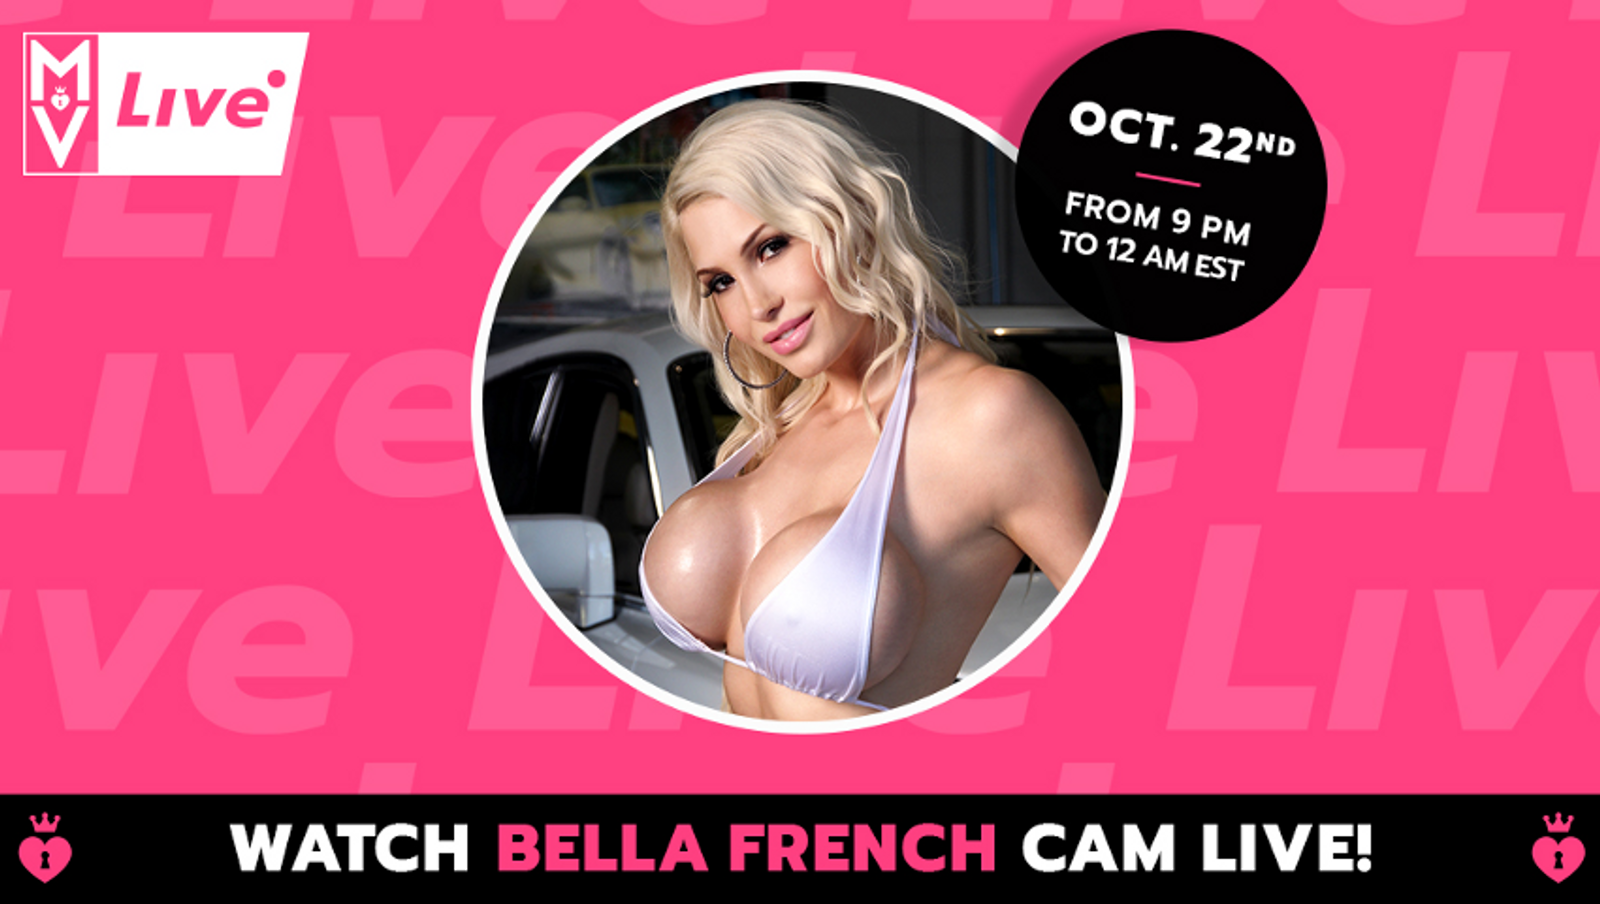 MV CEO Bella French to Live Cam in Effort to Normalize Sex Work